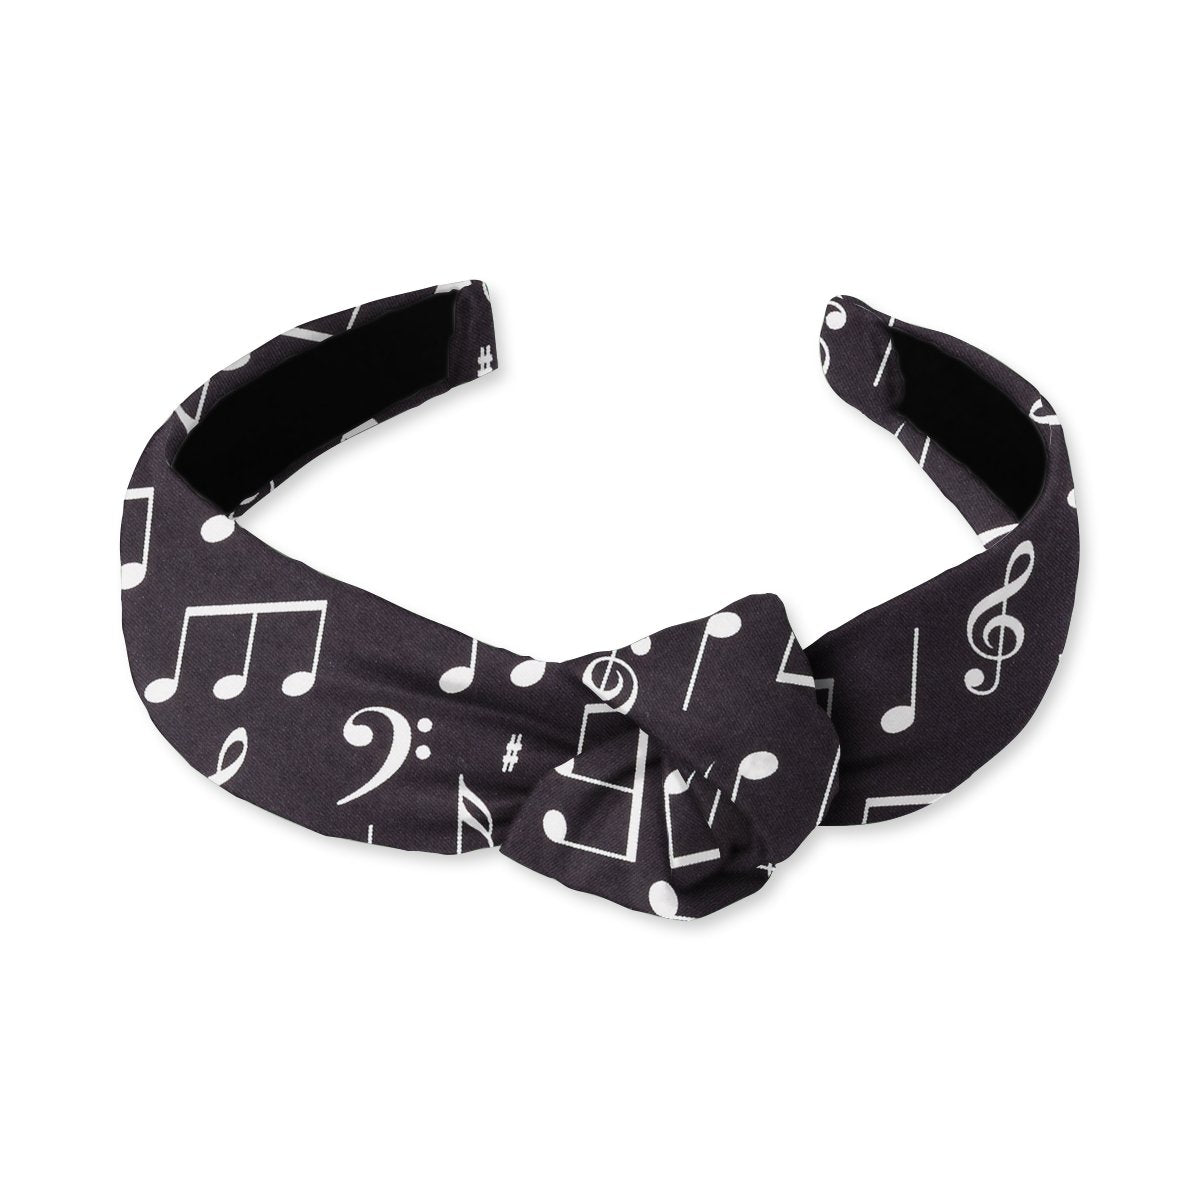 Music Notes - Knotted Ties Vermont Beau – Headband of